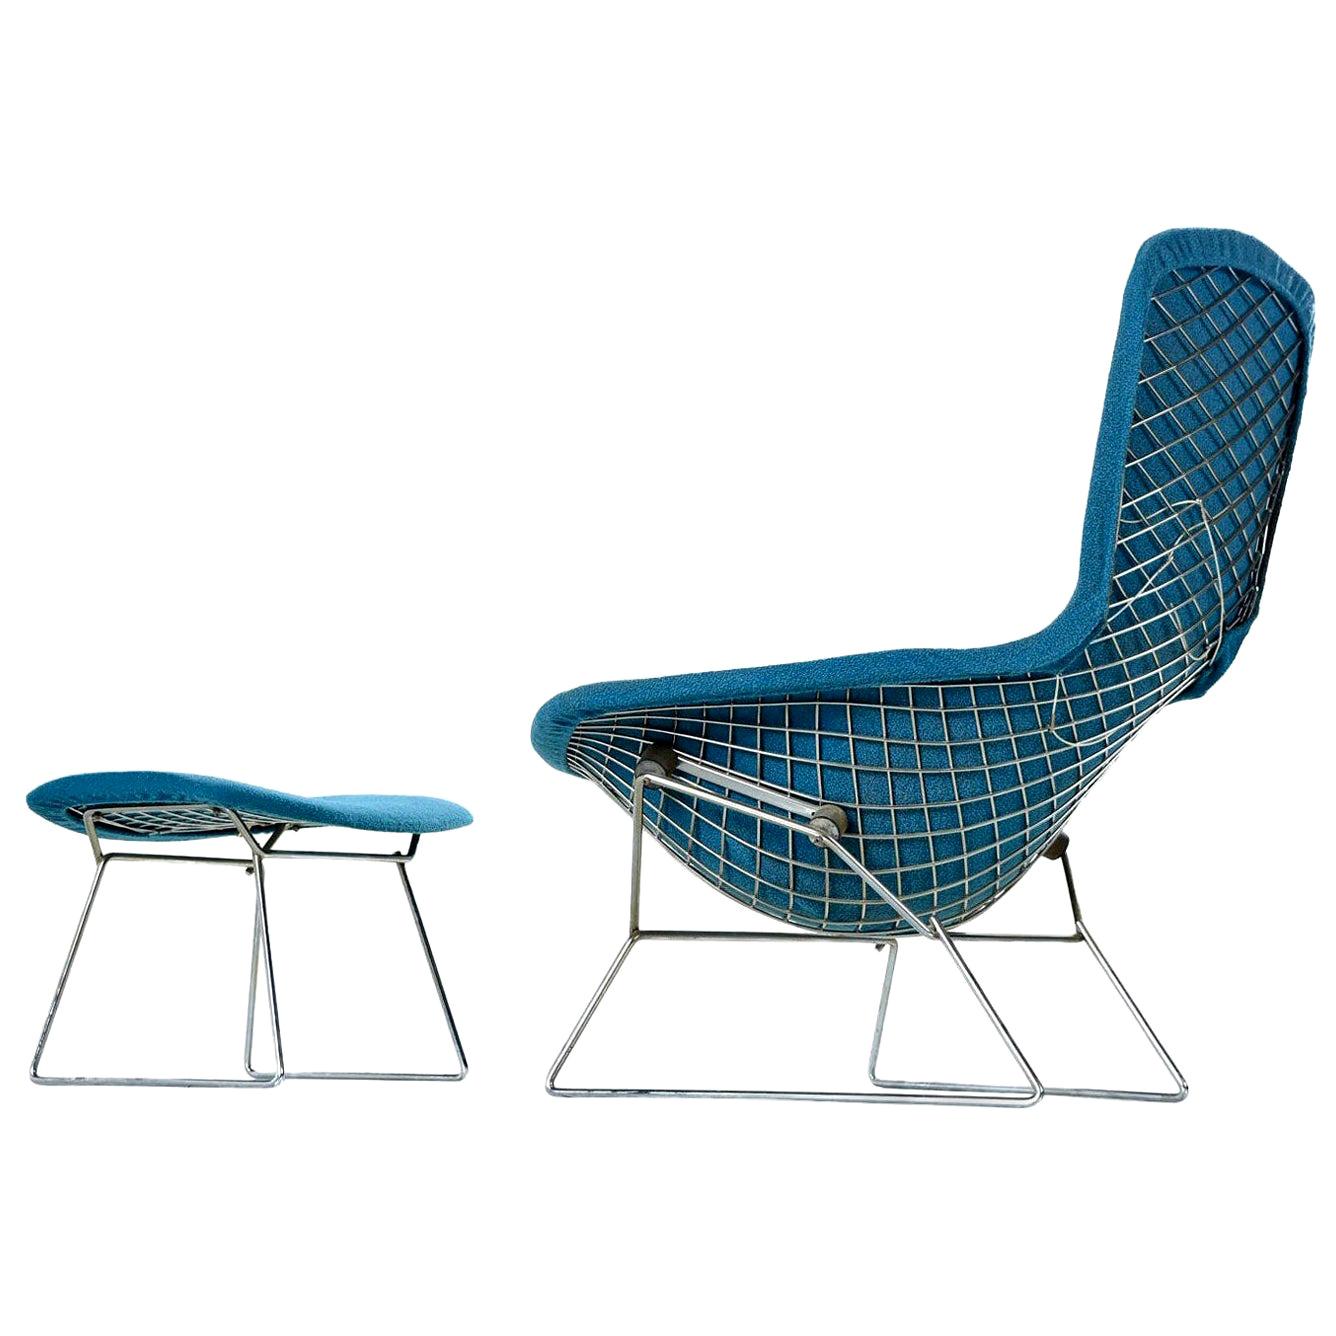 Vintage original Harry Bertoia bird chair and ottoman. Polished chrome stainless steel rod construction upholstered in original, curly cue bouclé blue fabric.

The bird chair is an astounding study in space, form and function by one of the master